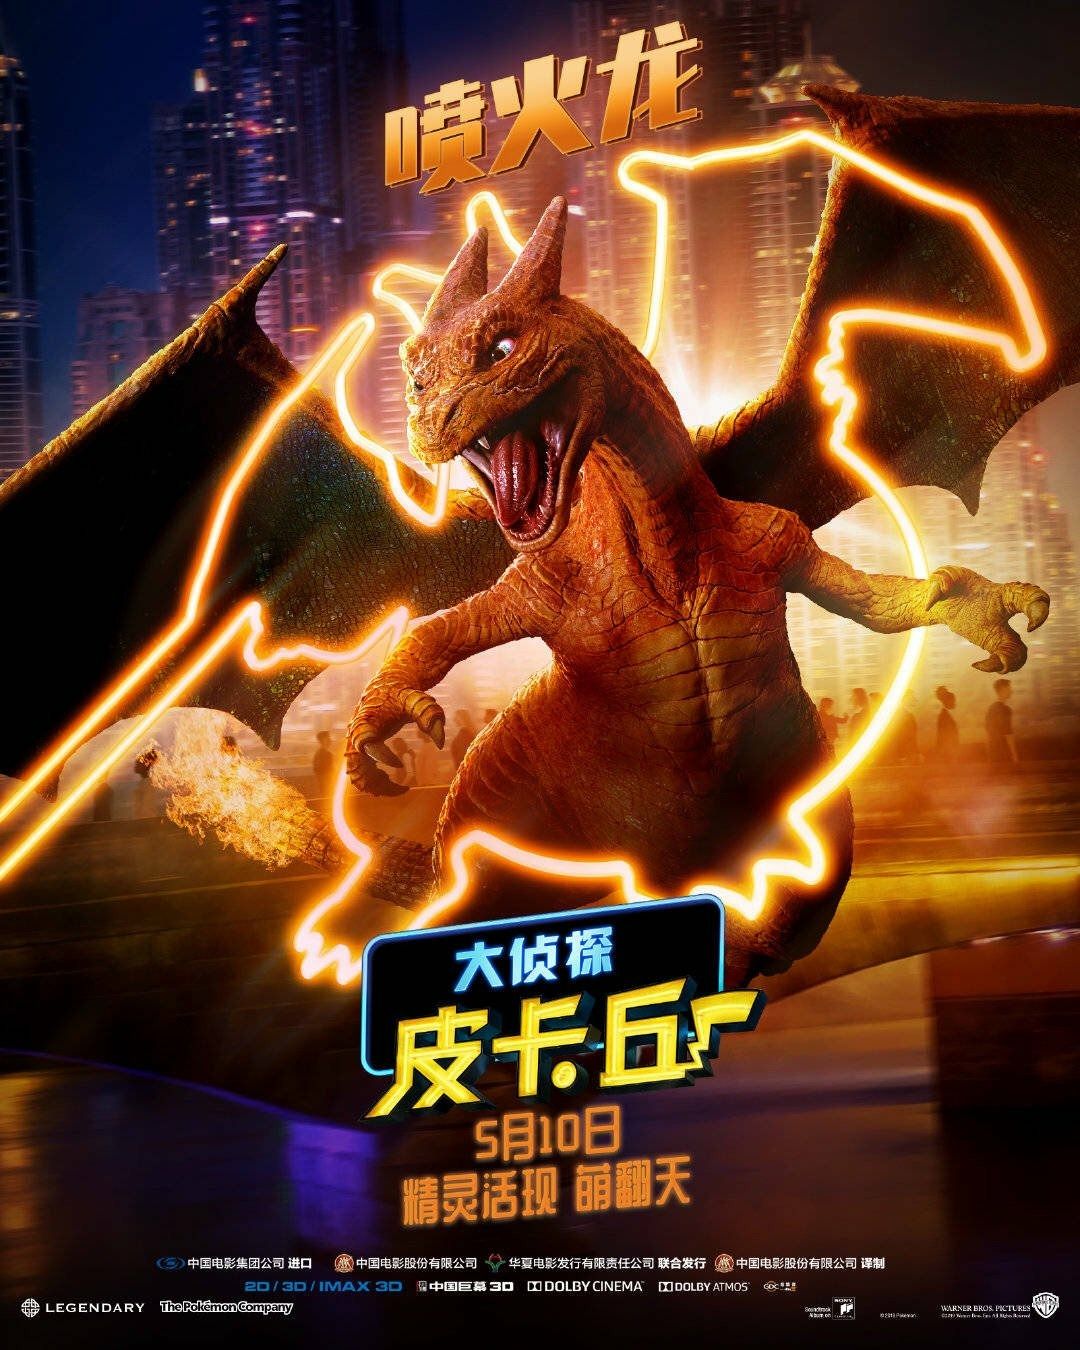 Detective Pikachu character poster #5